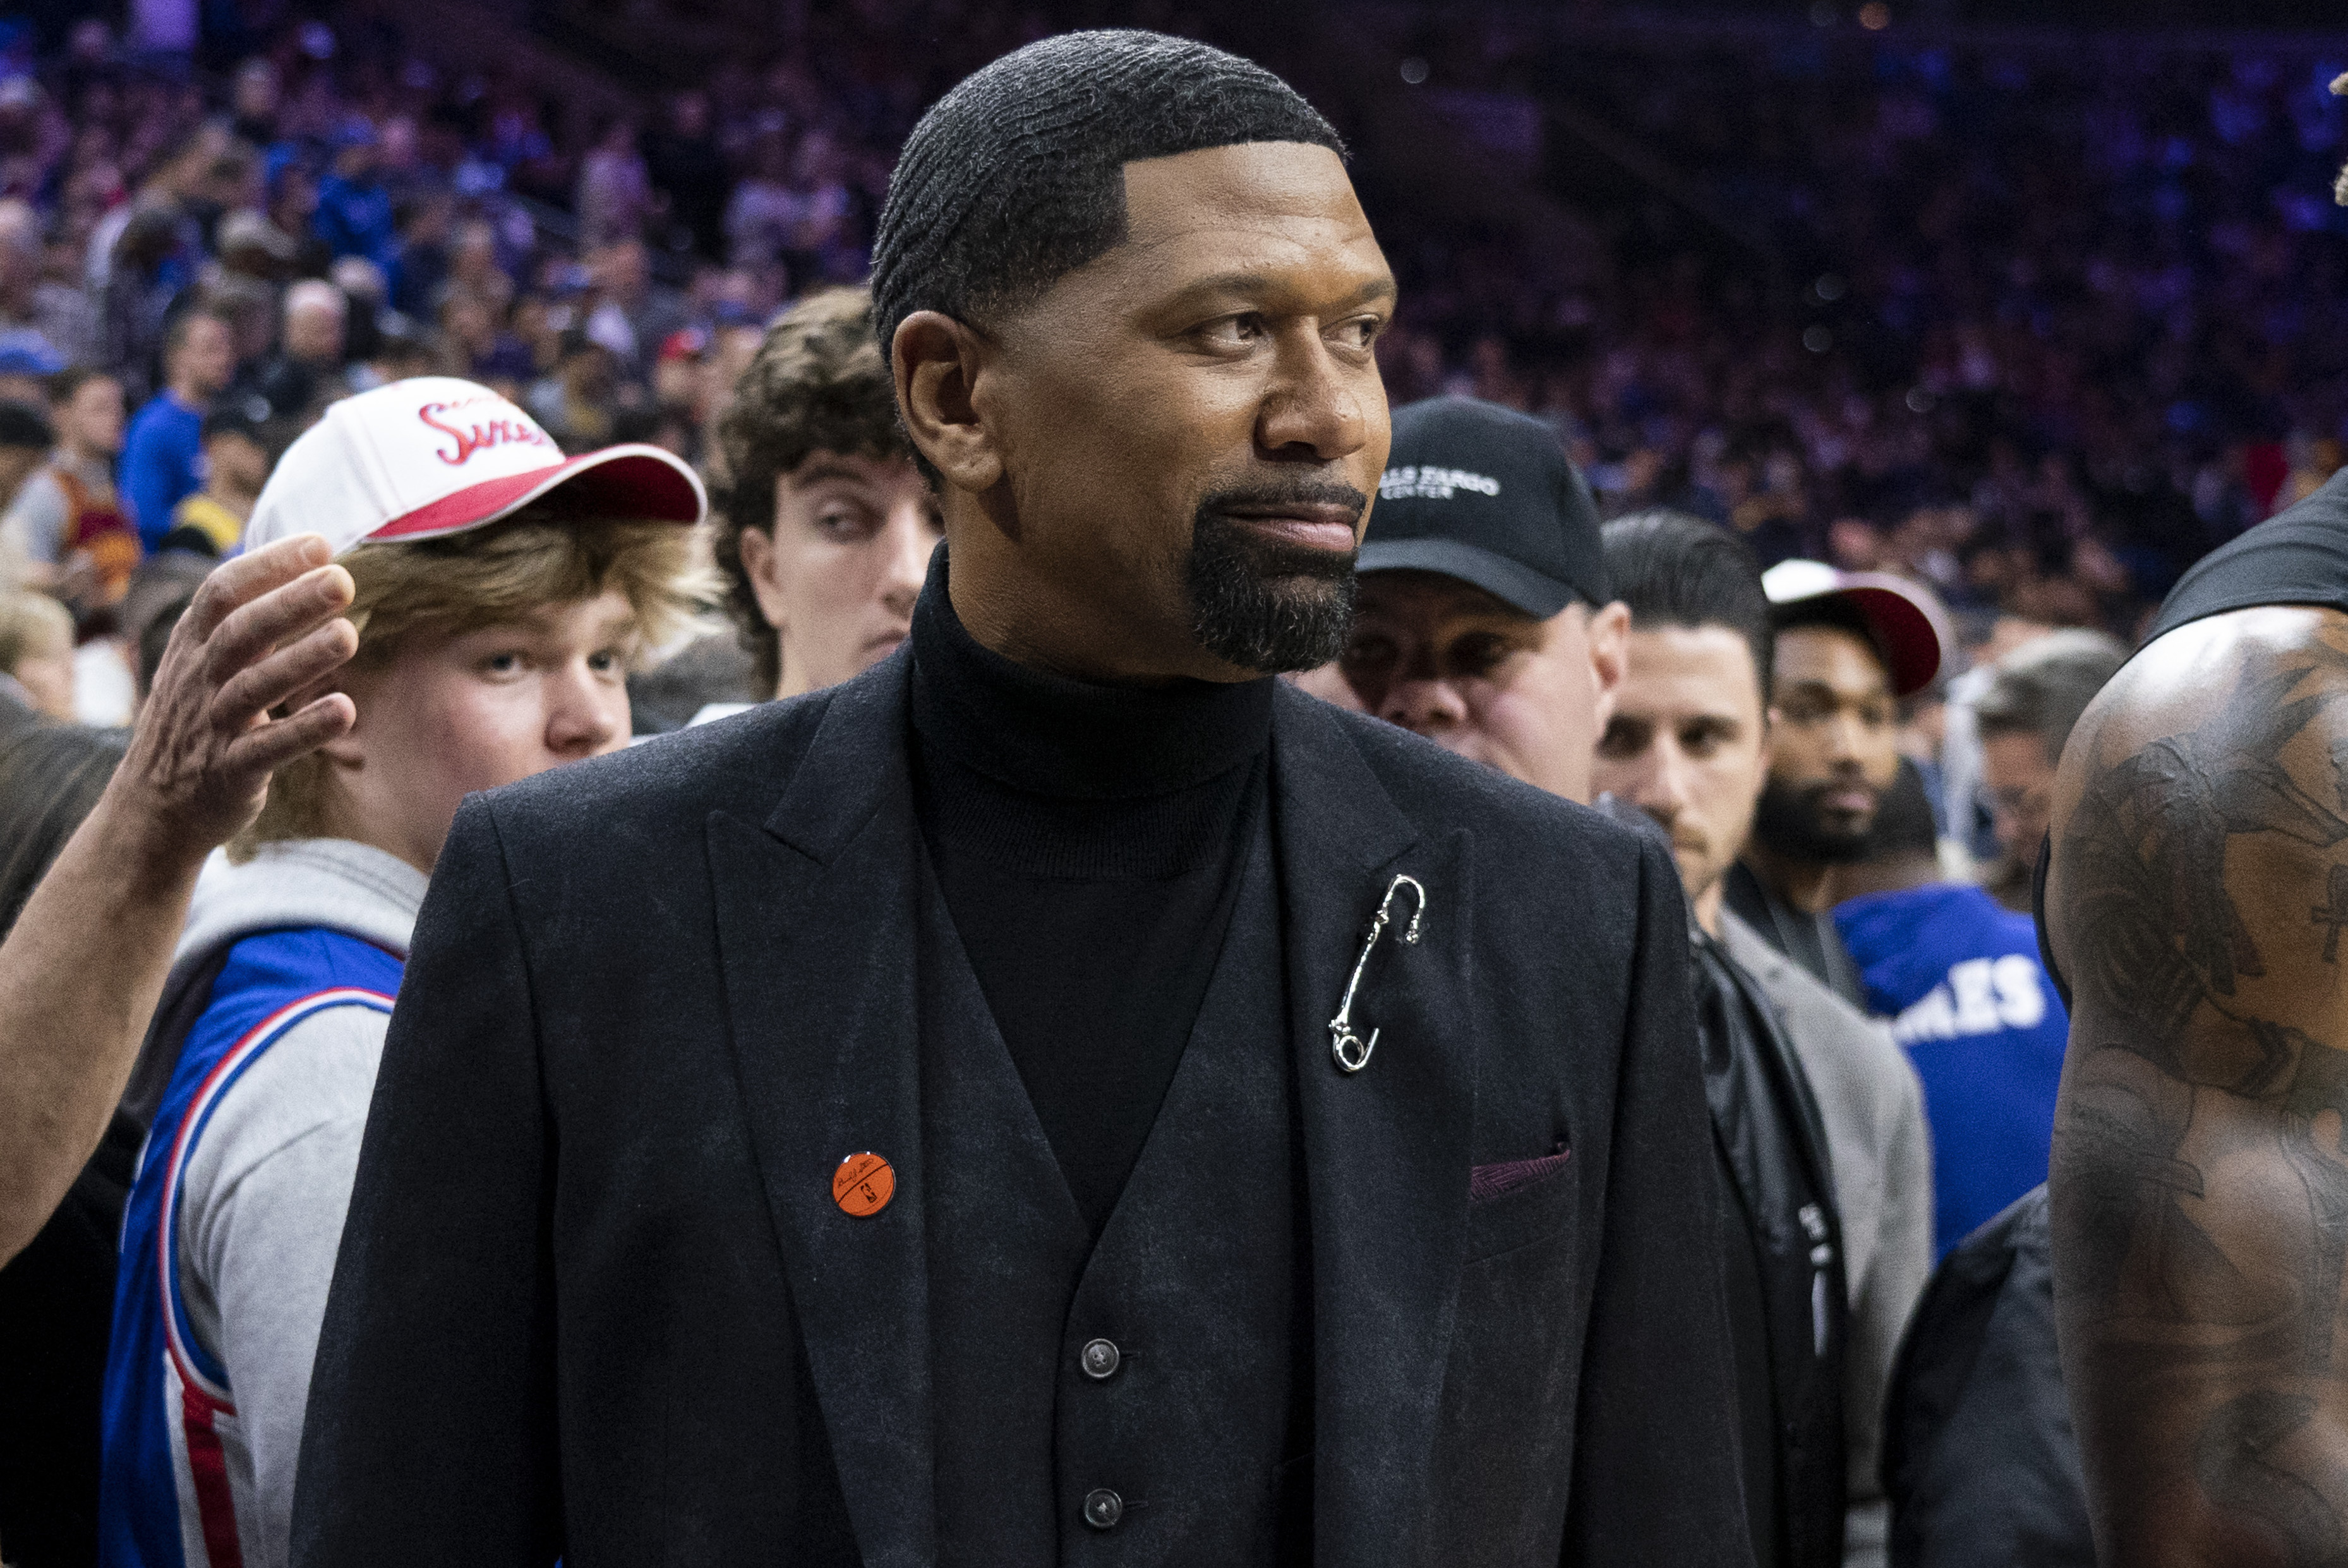 Jalen Rose Apologizes After Saying Kevin Love Made USA Olympic Team Due to 'Tokenism'